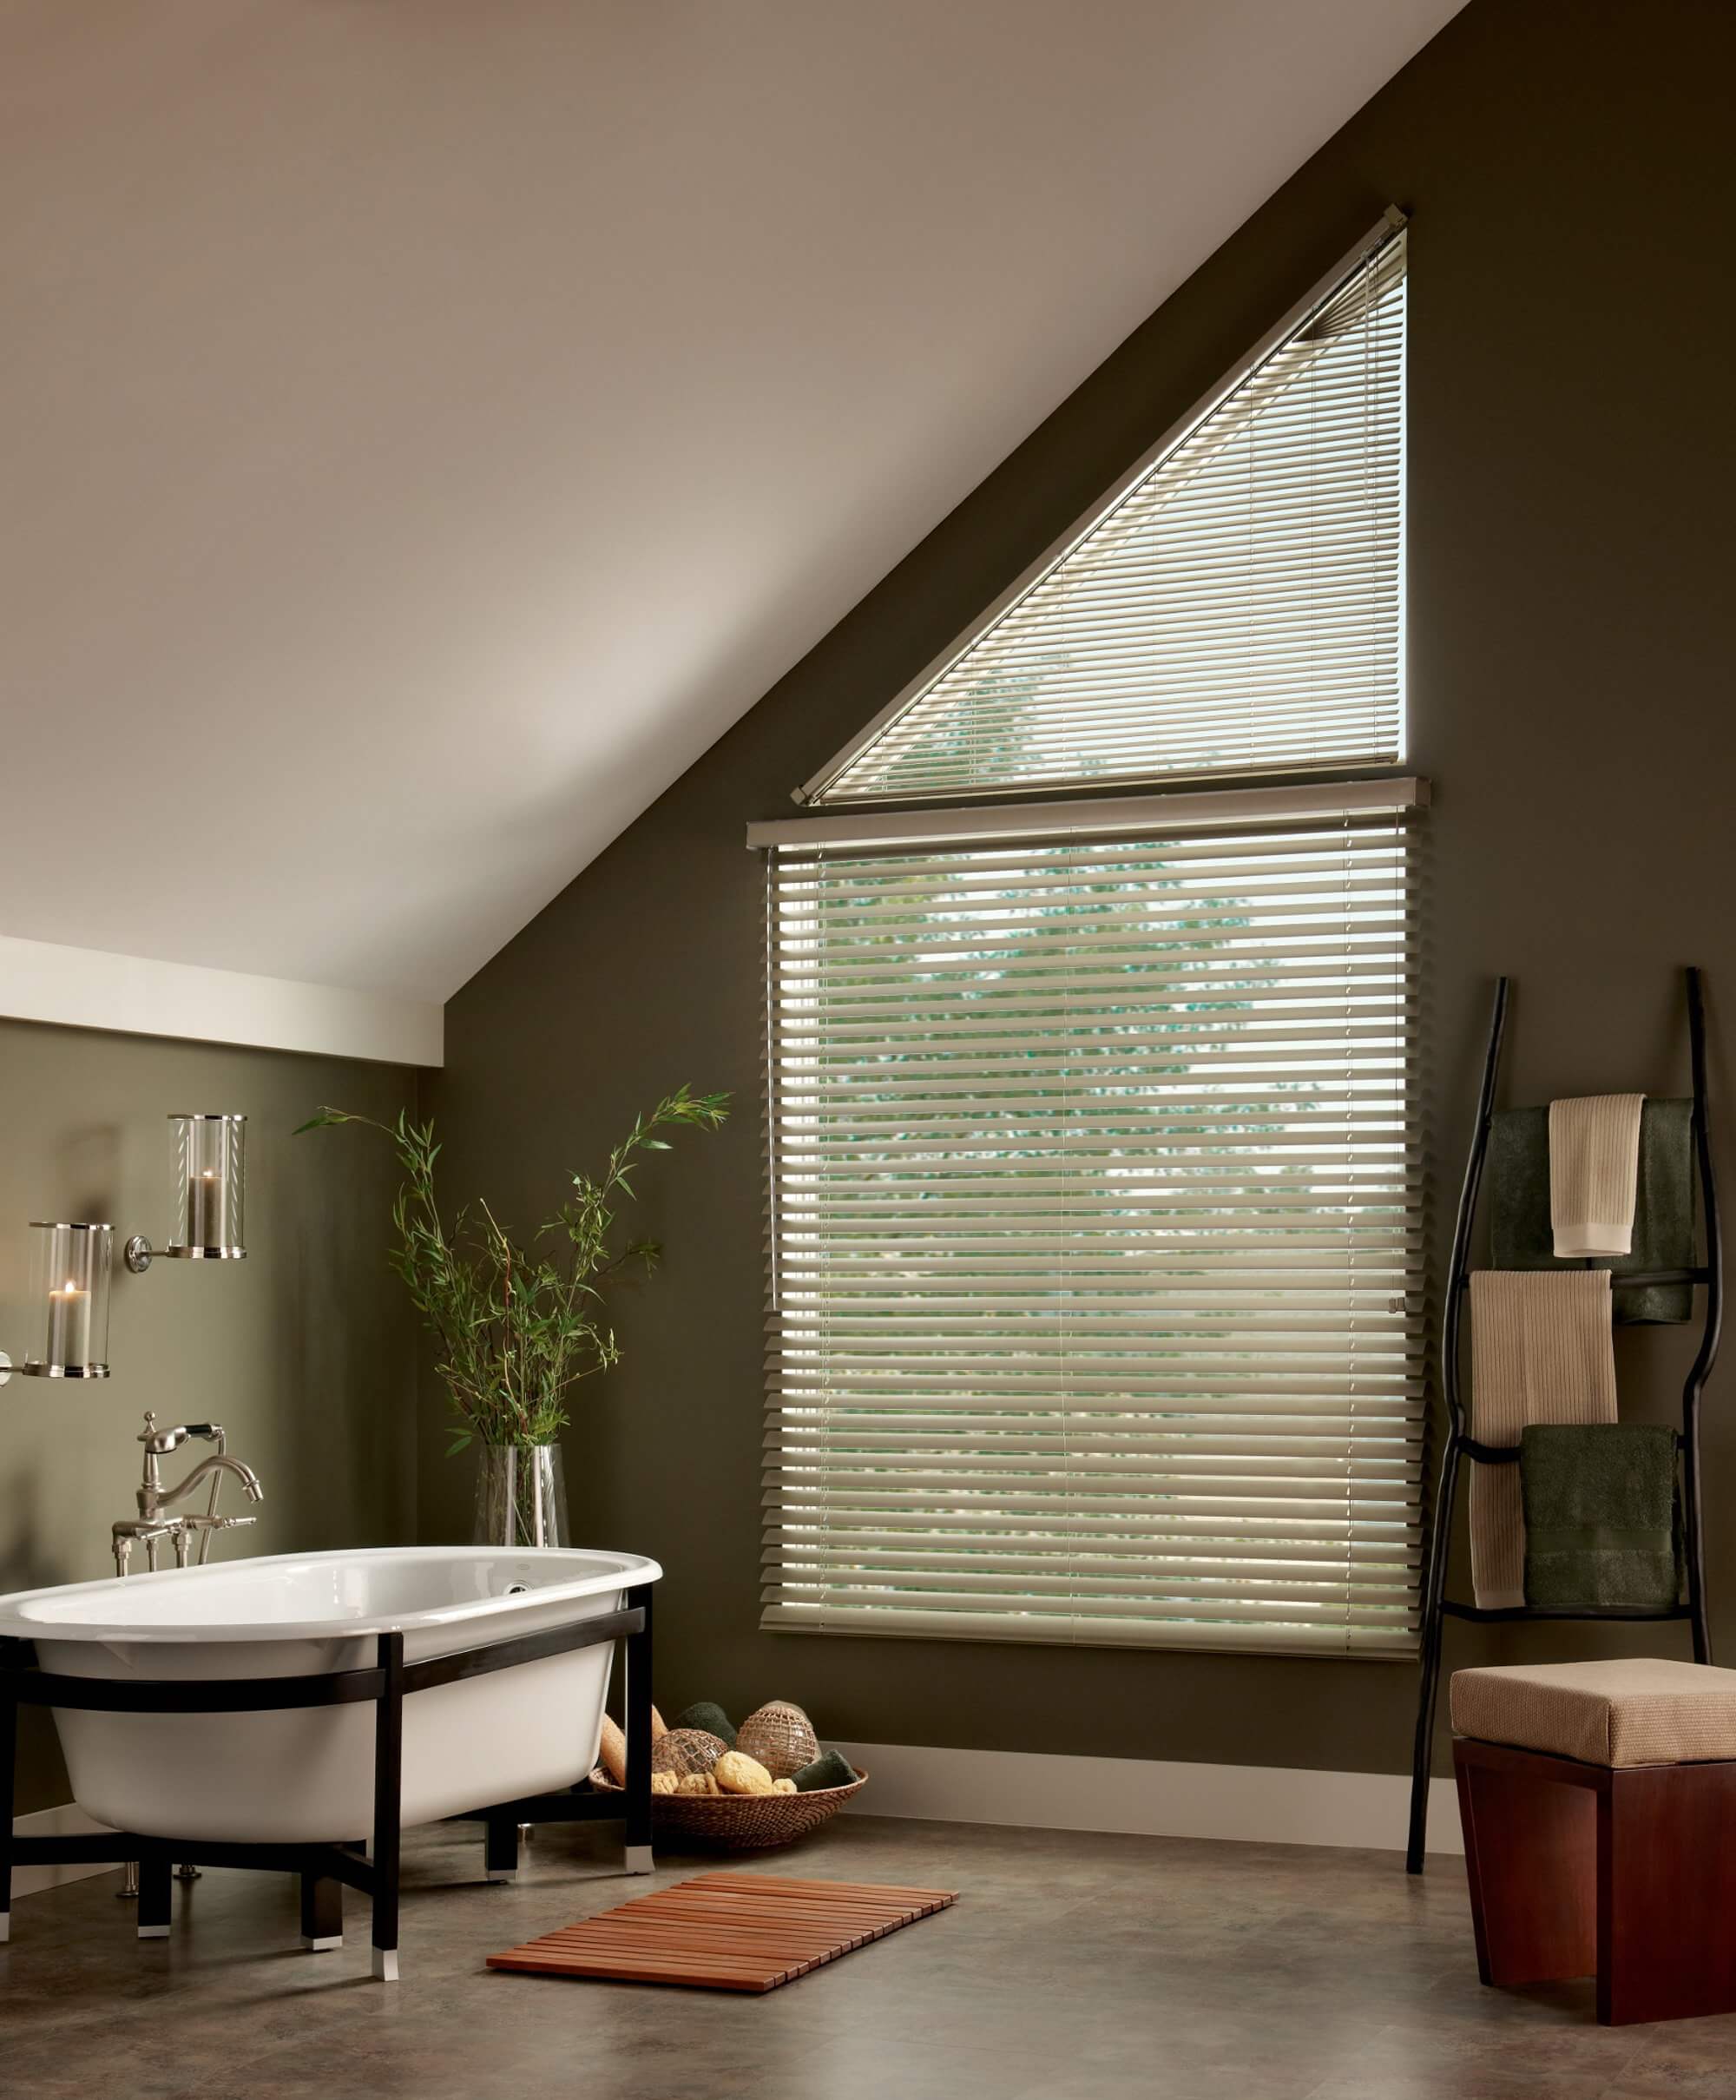 Window treatments for angled windows are perfect for adding privacy and light control.